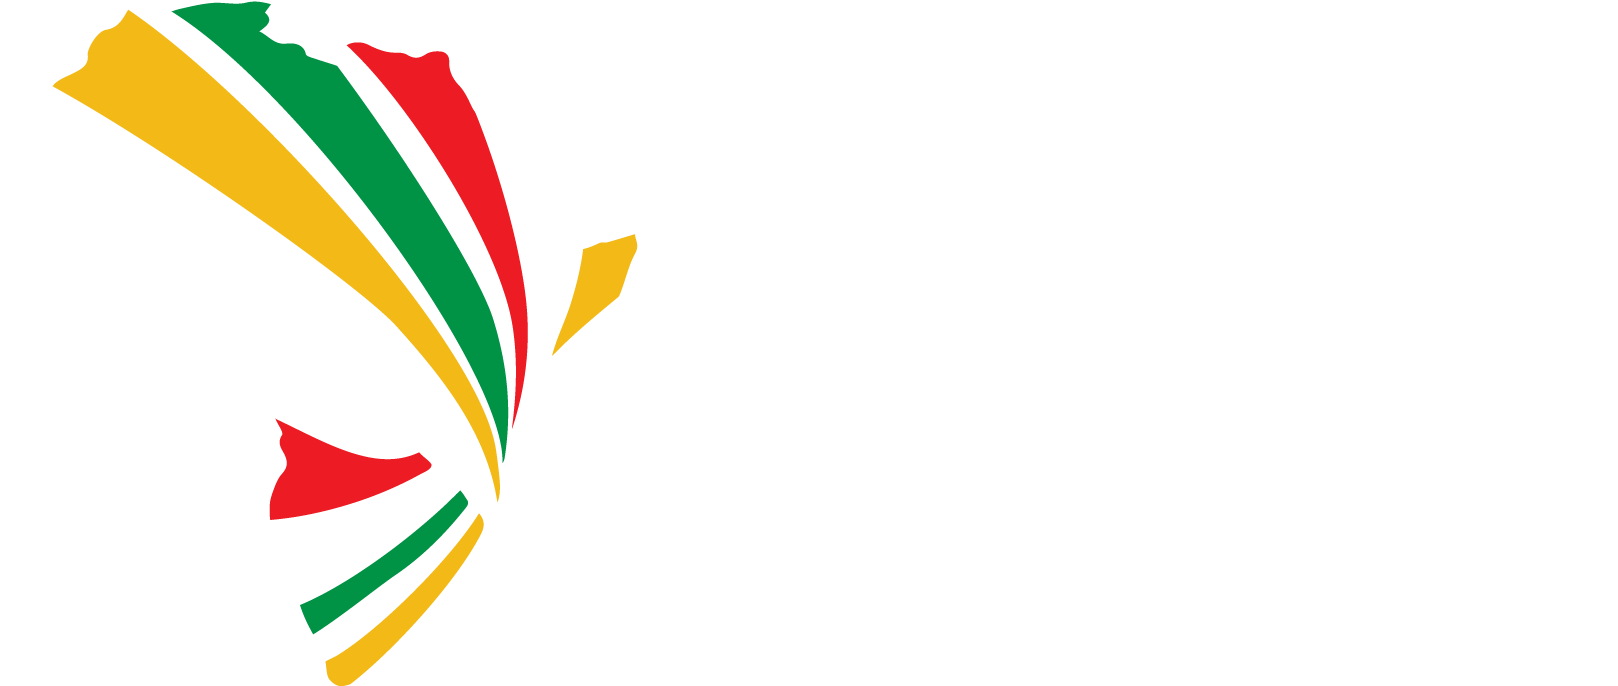 Stanford Africa Business Forum Logo PNG